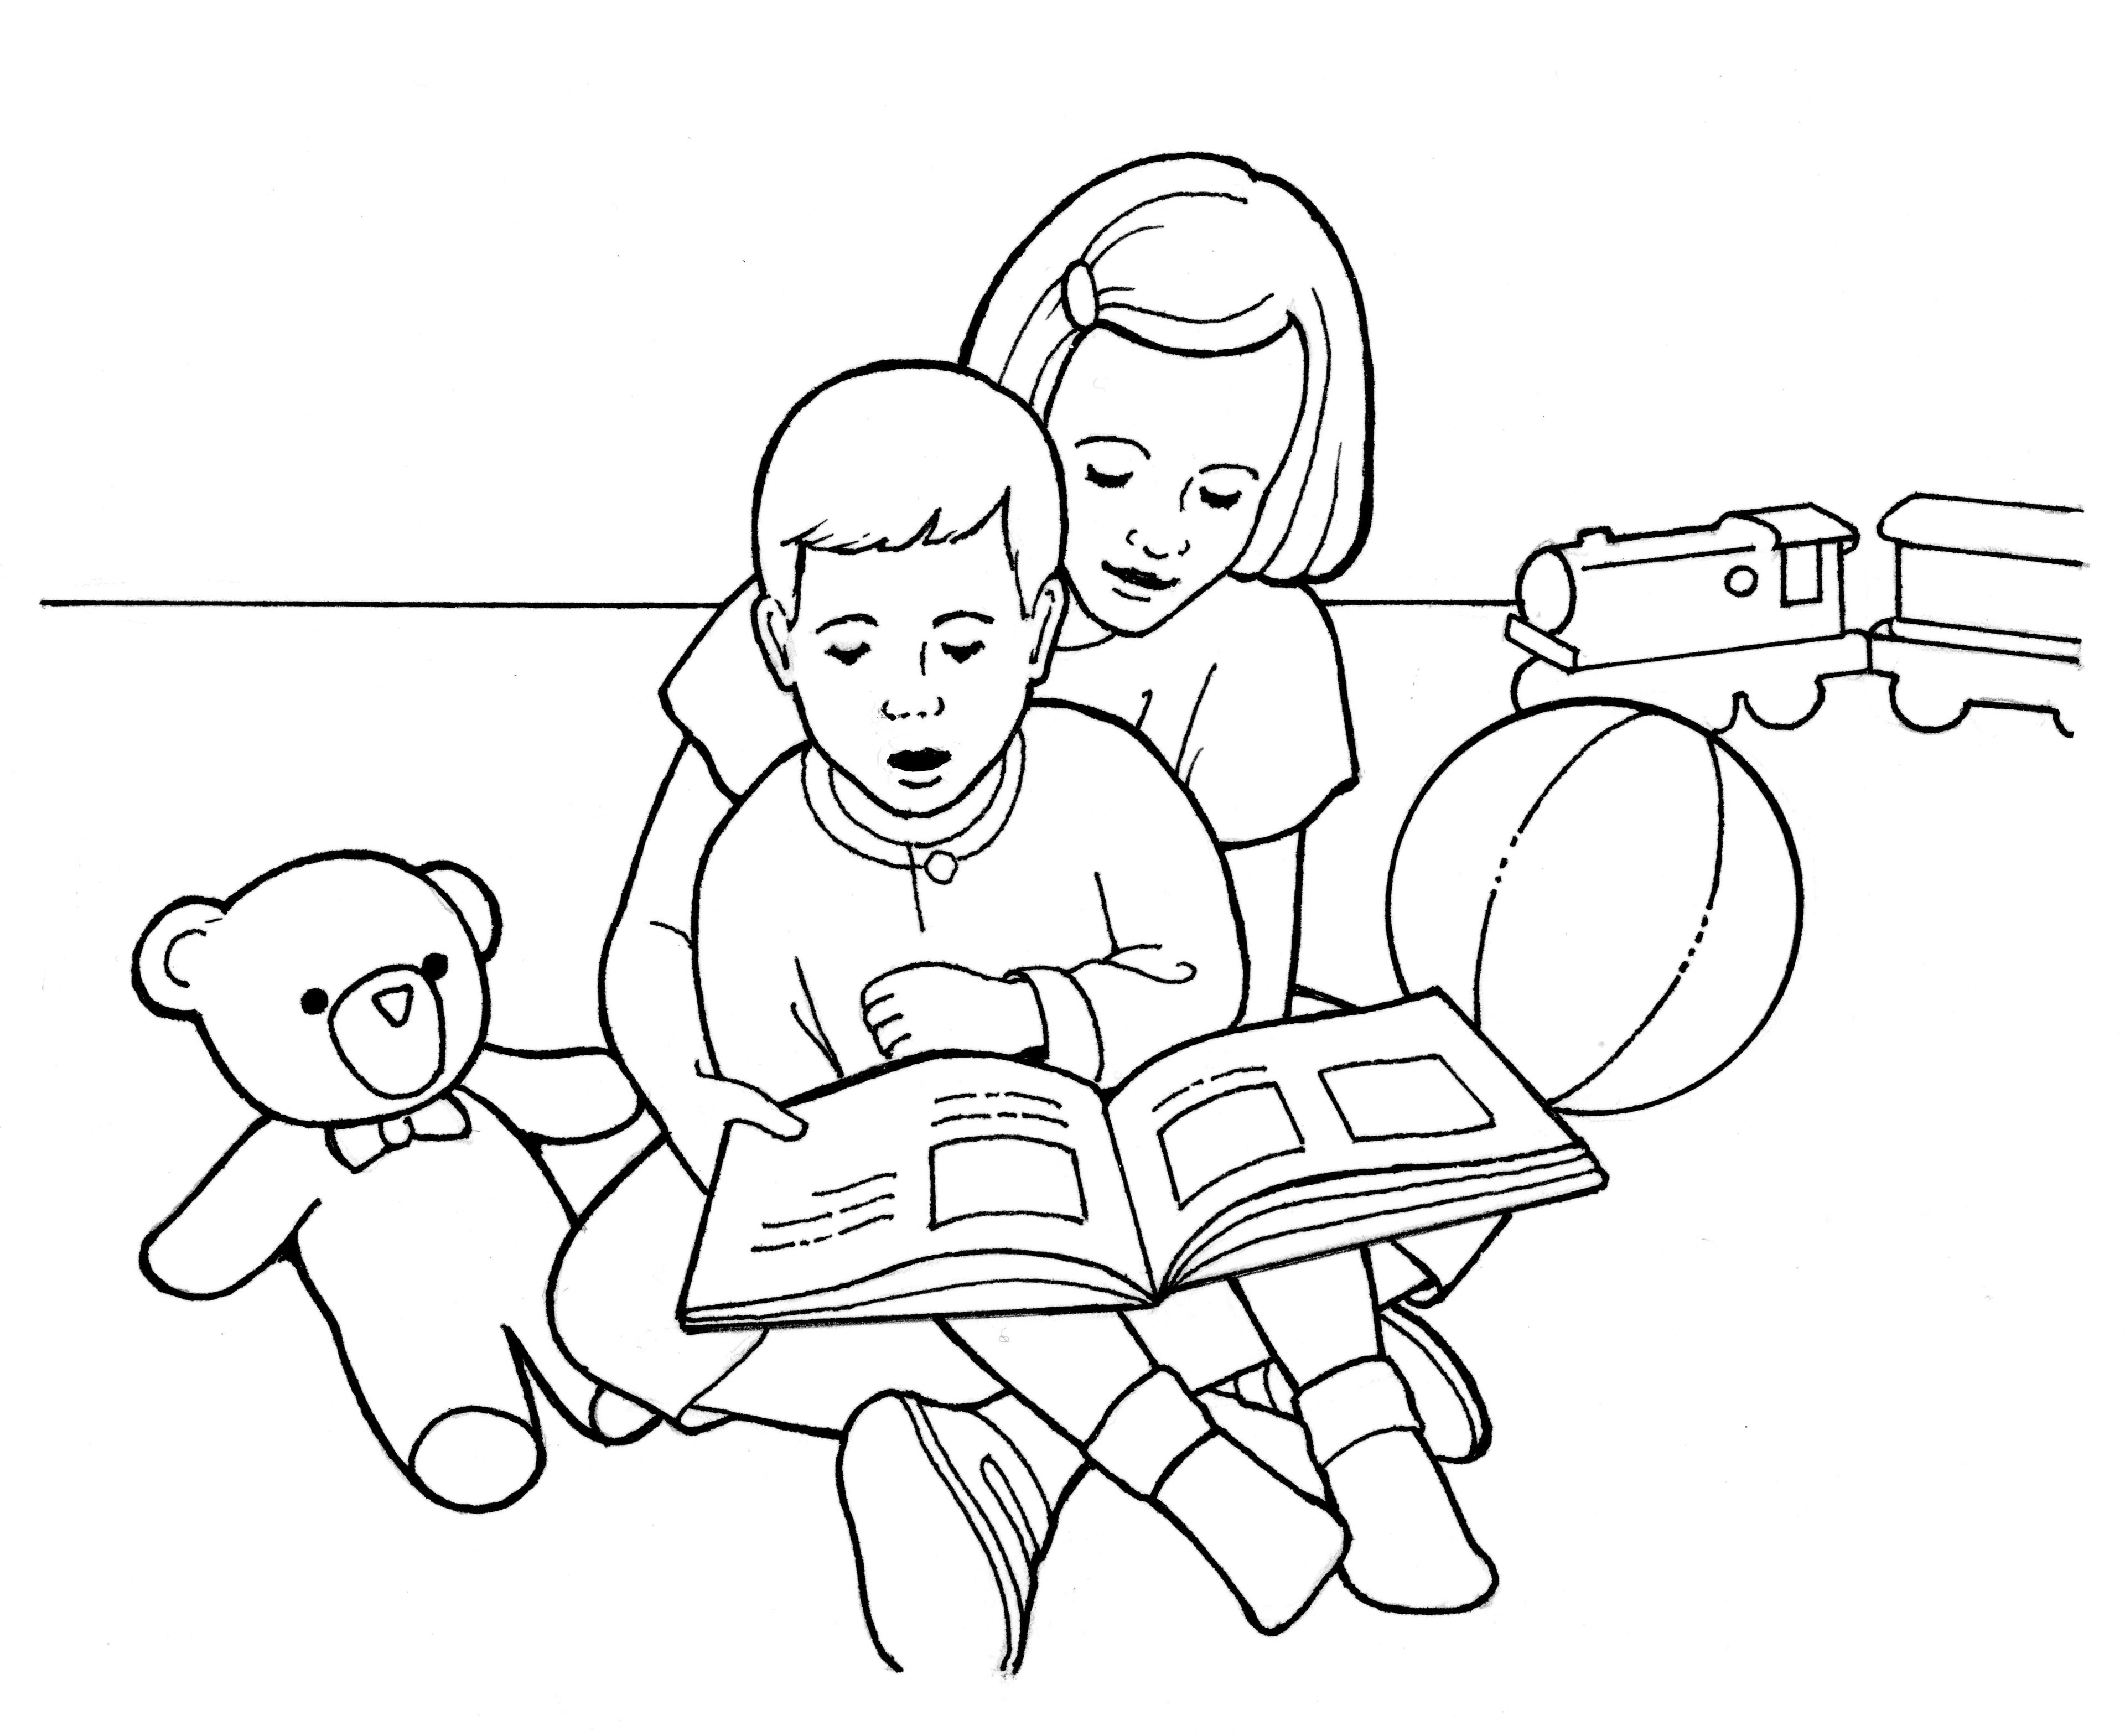 A line drawing of children reading together.